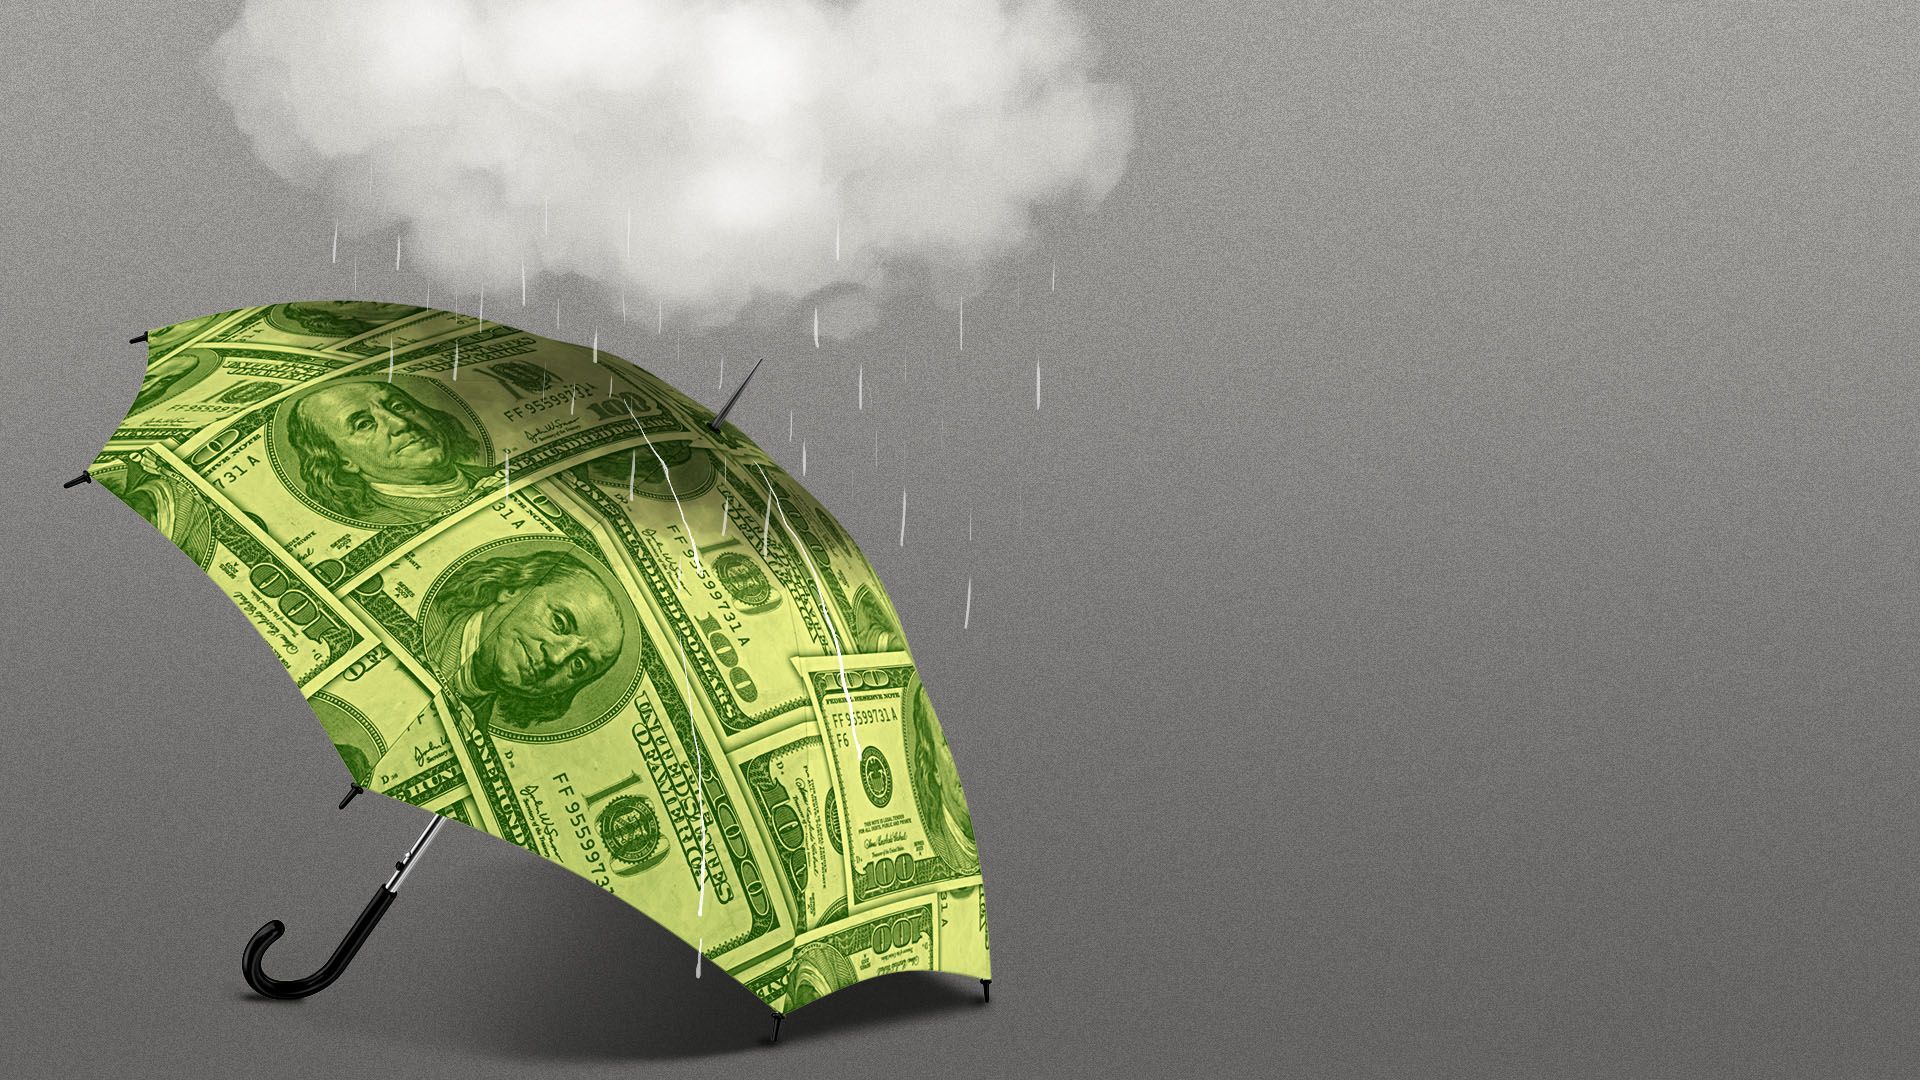 Illustration of an umbrella made up of money with a little raincloud over it 